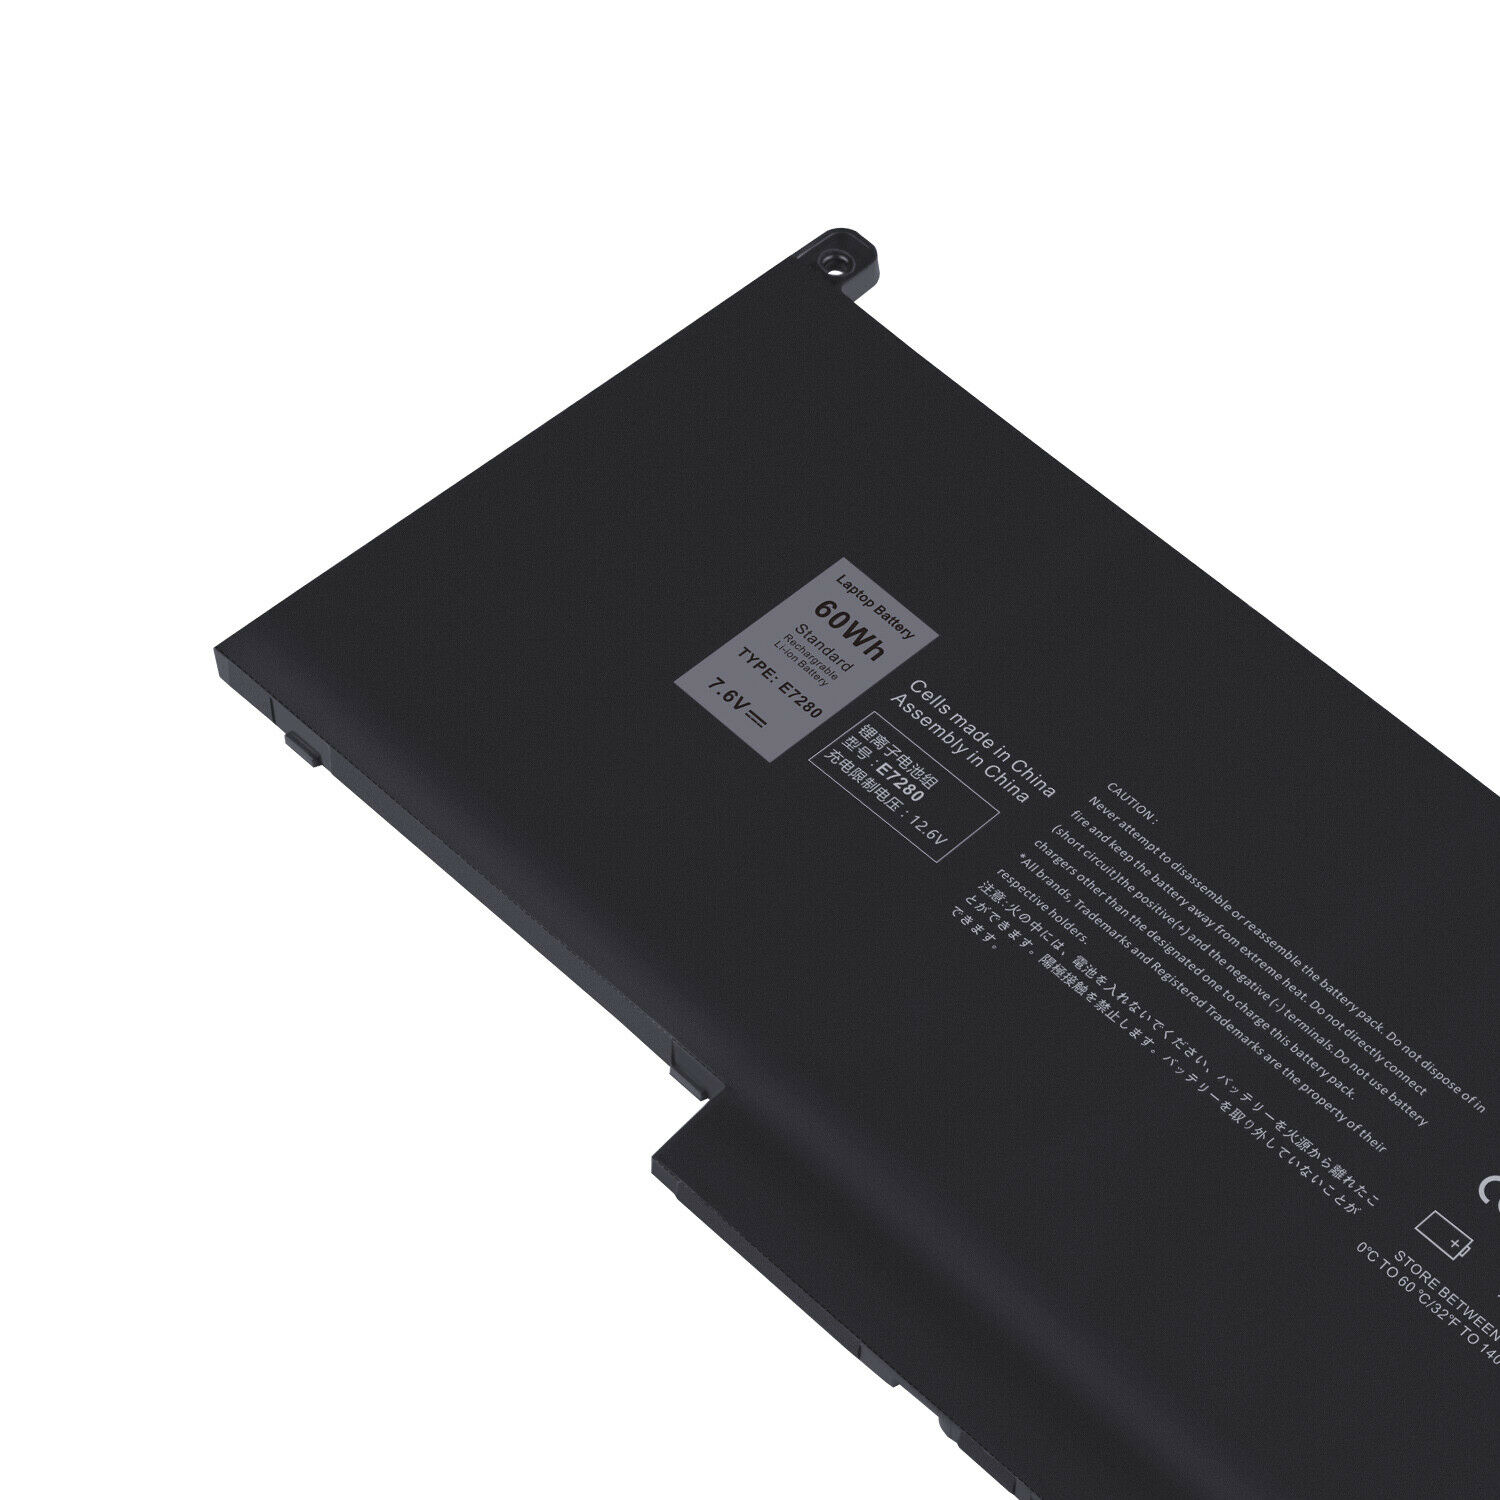 Accu voor F3YGT Dell latitude 7490 (i5-8350U FHD) P73G002 P29S002 KG7VF 2X39G(compatible)